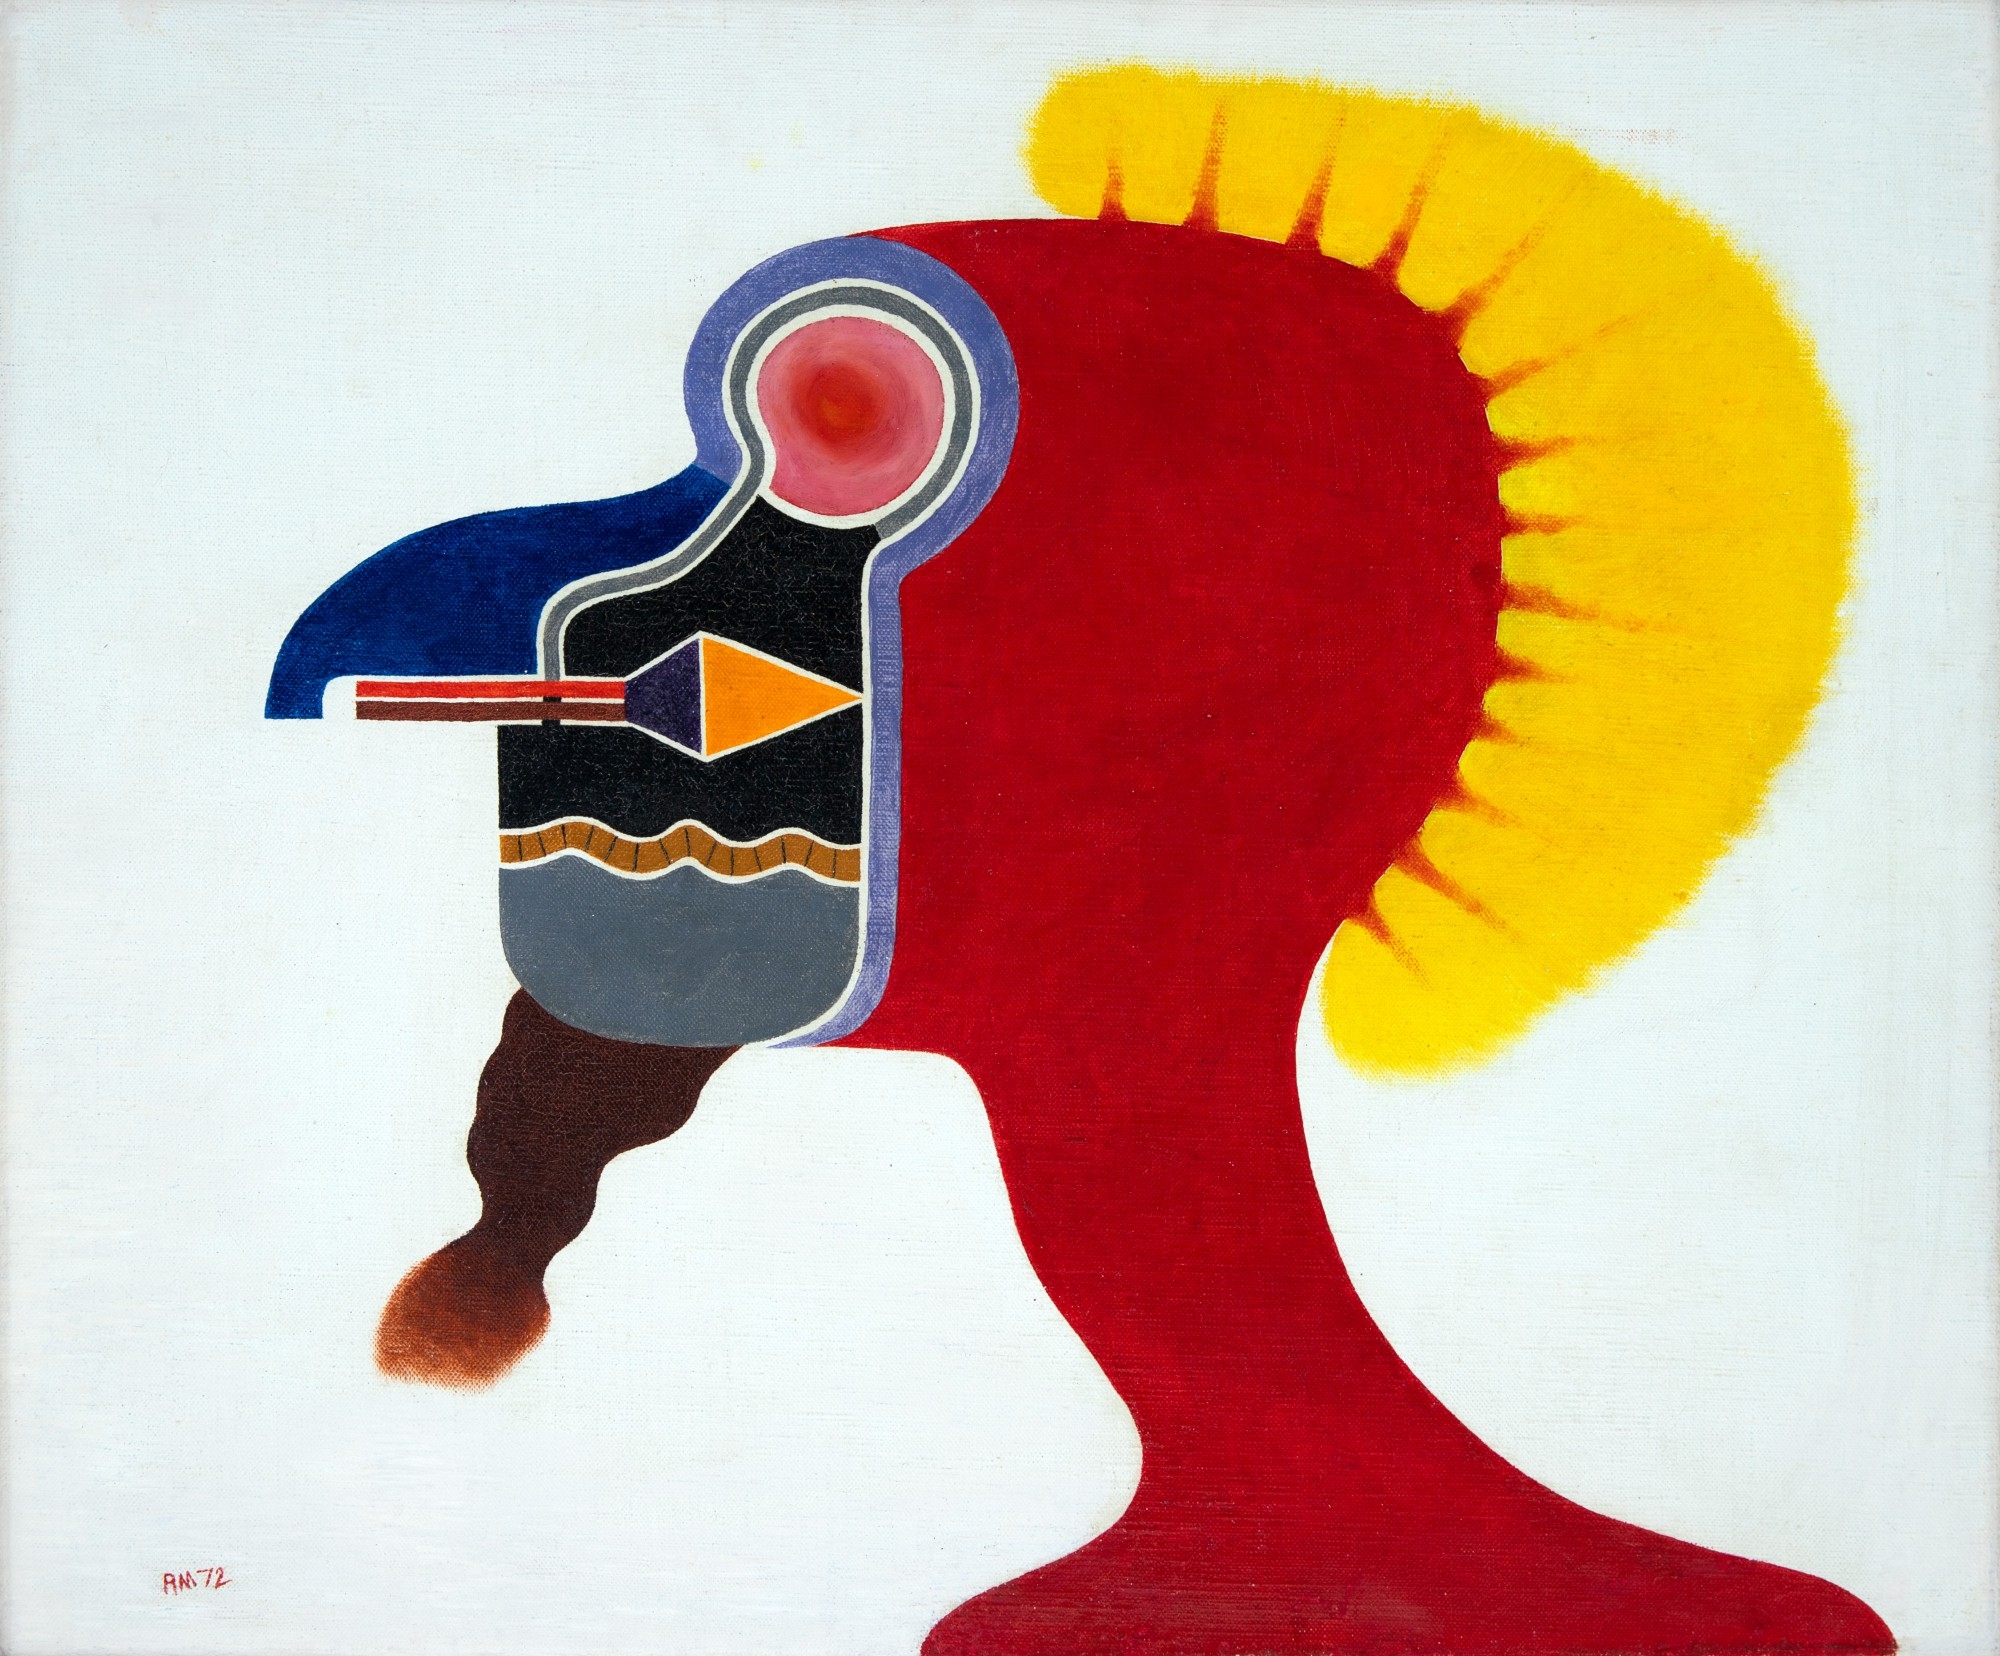 Perfil by Roberto Magalhães, 1972